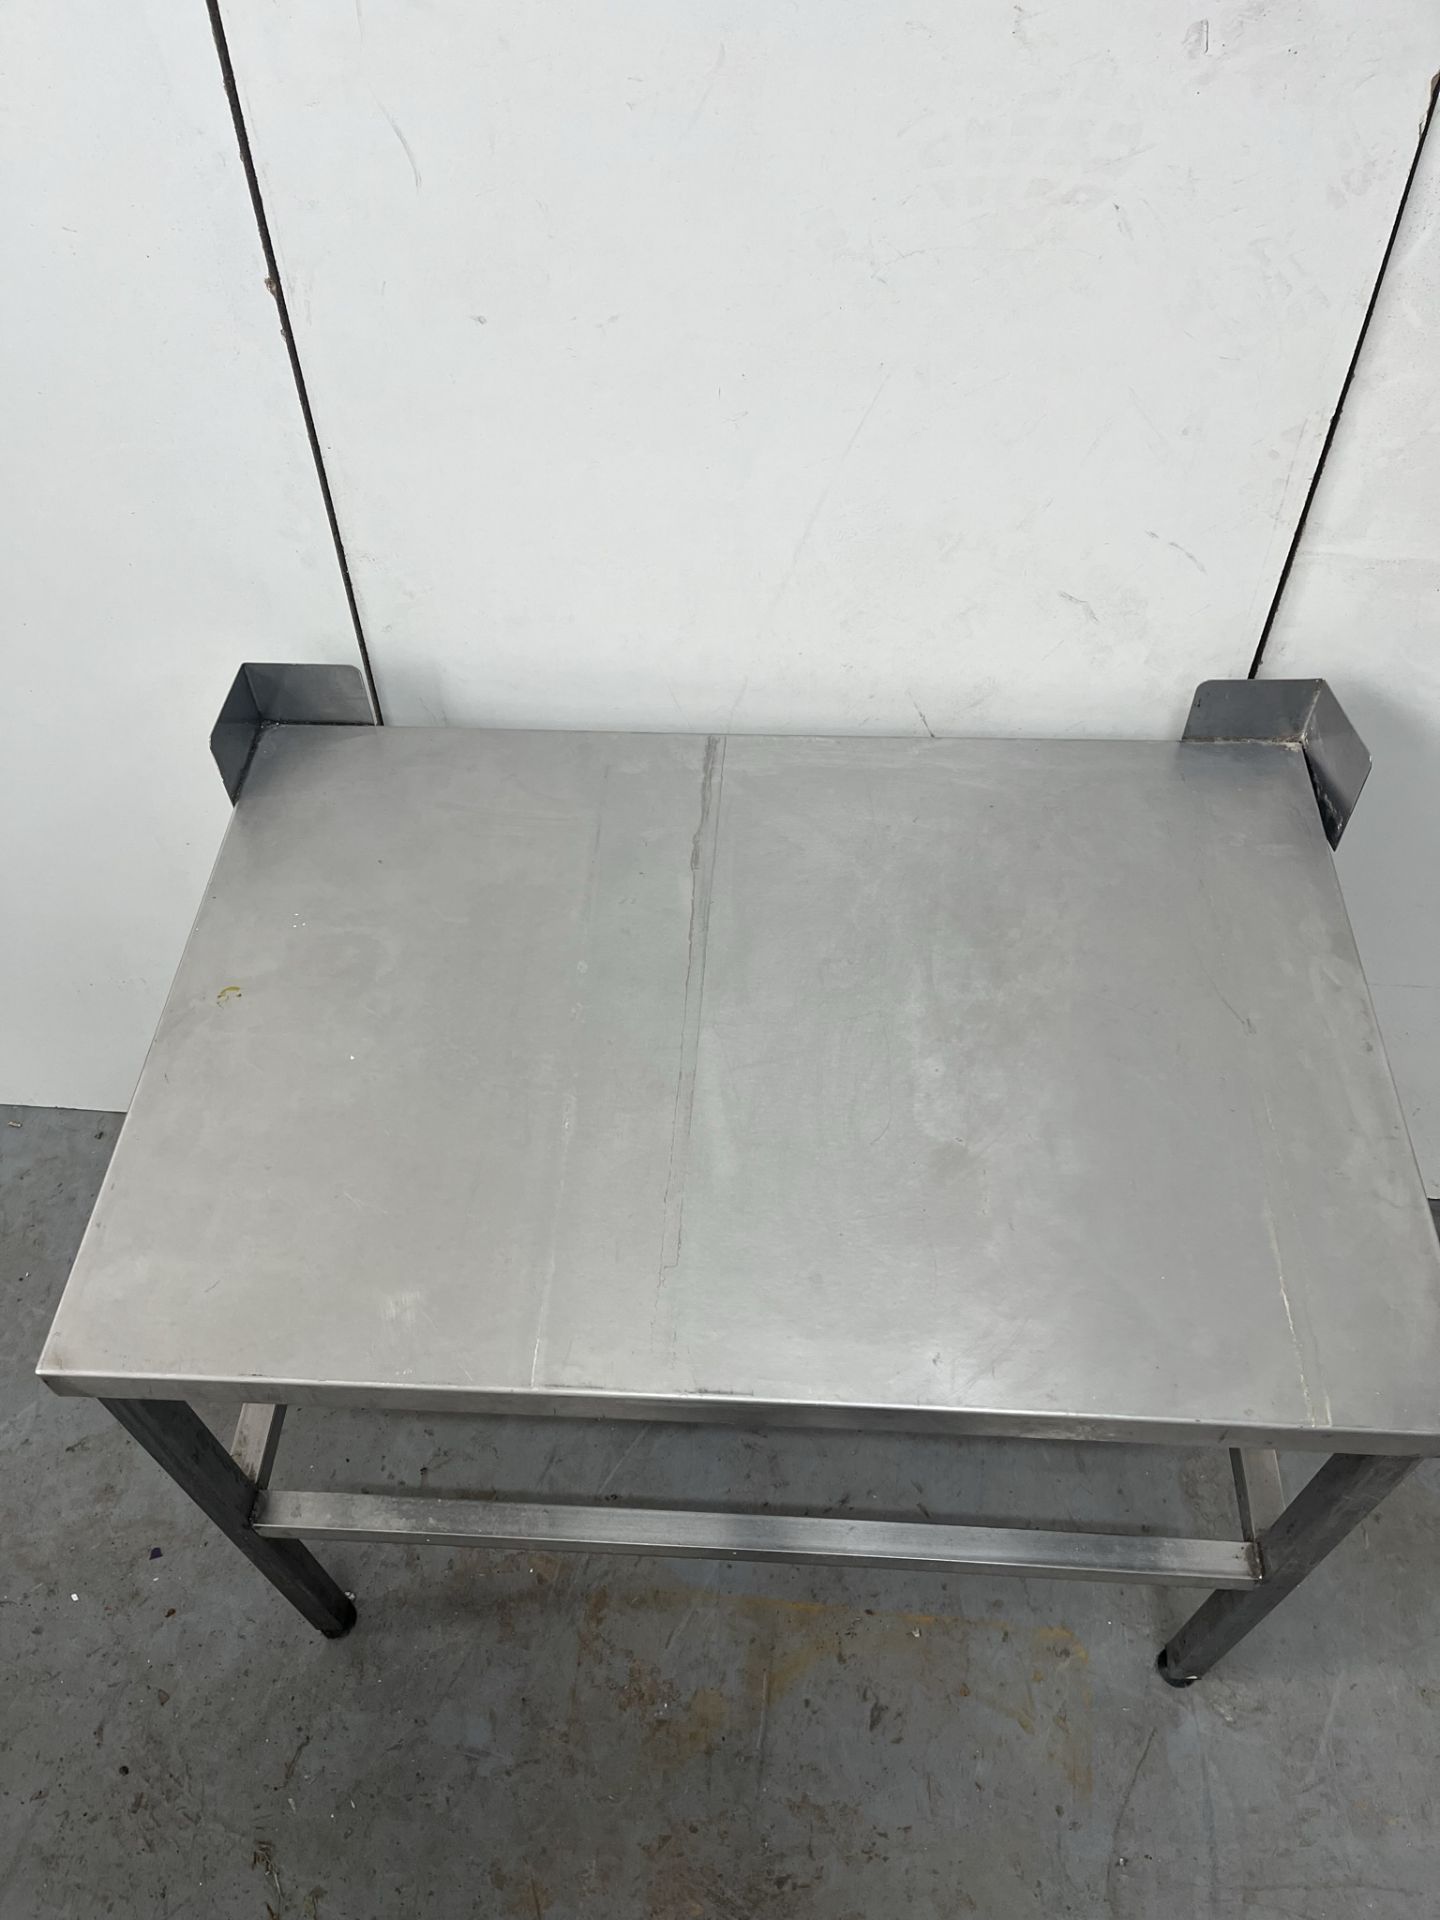 900mm Stainless Steel Catering Preperation Table - Image 3 of 4